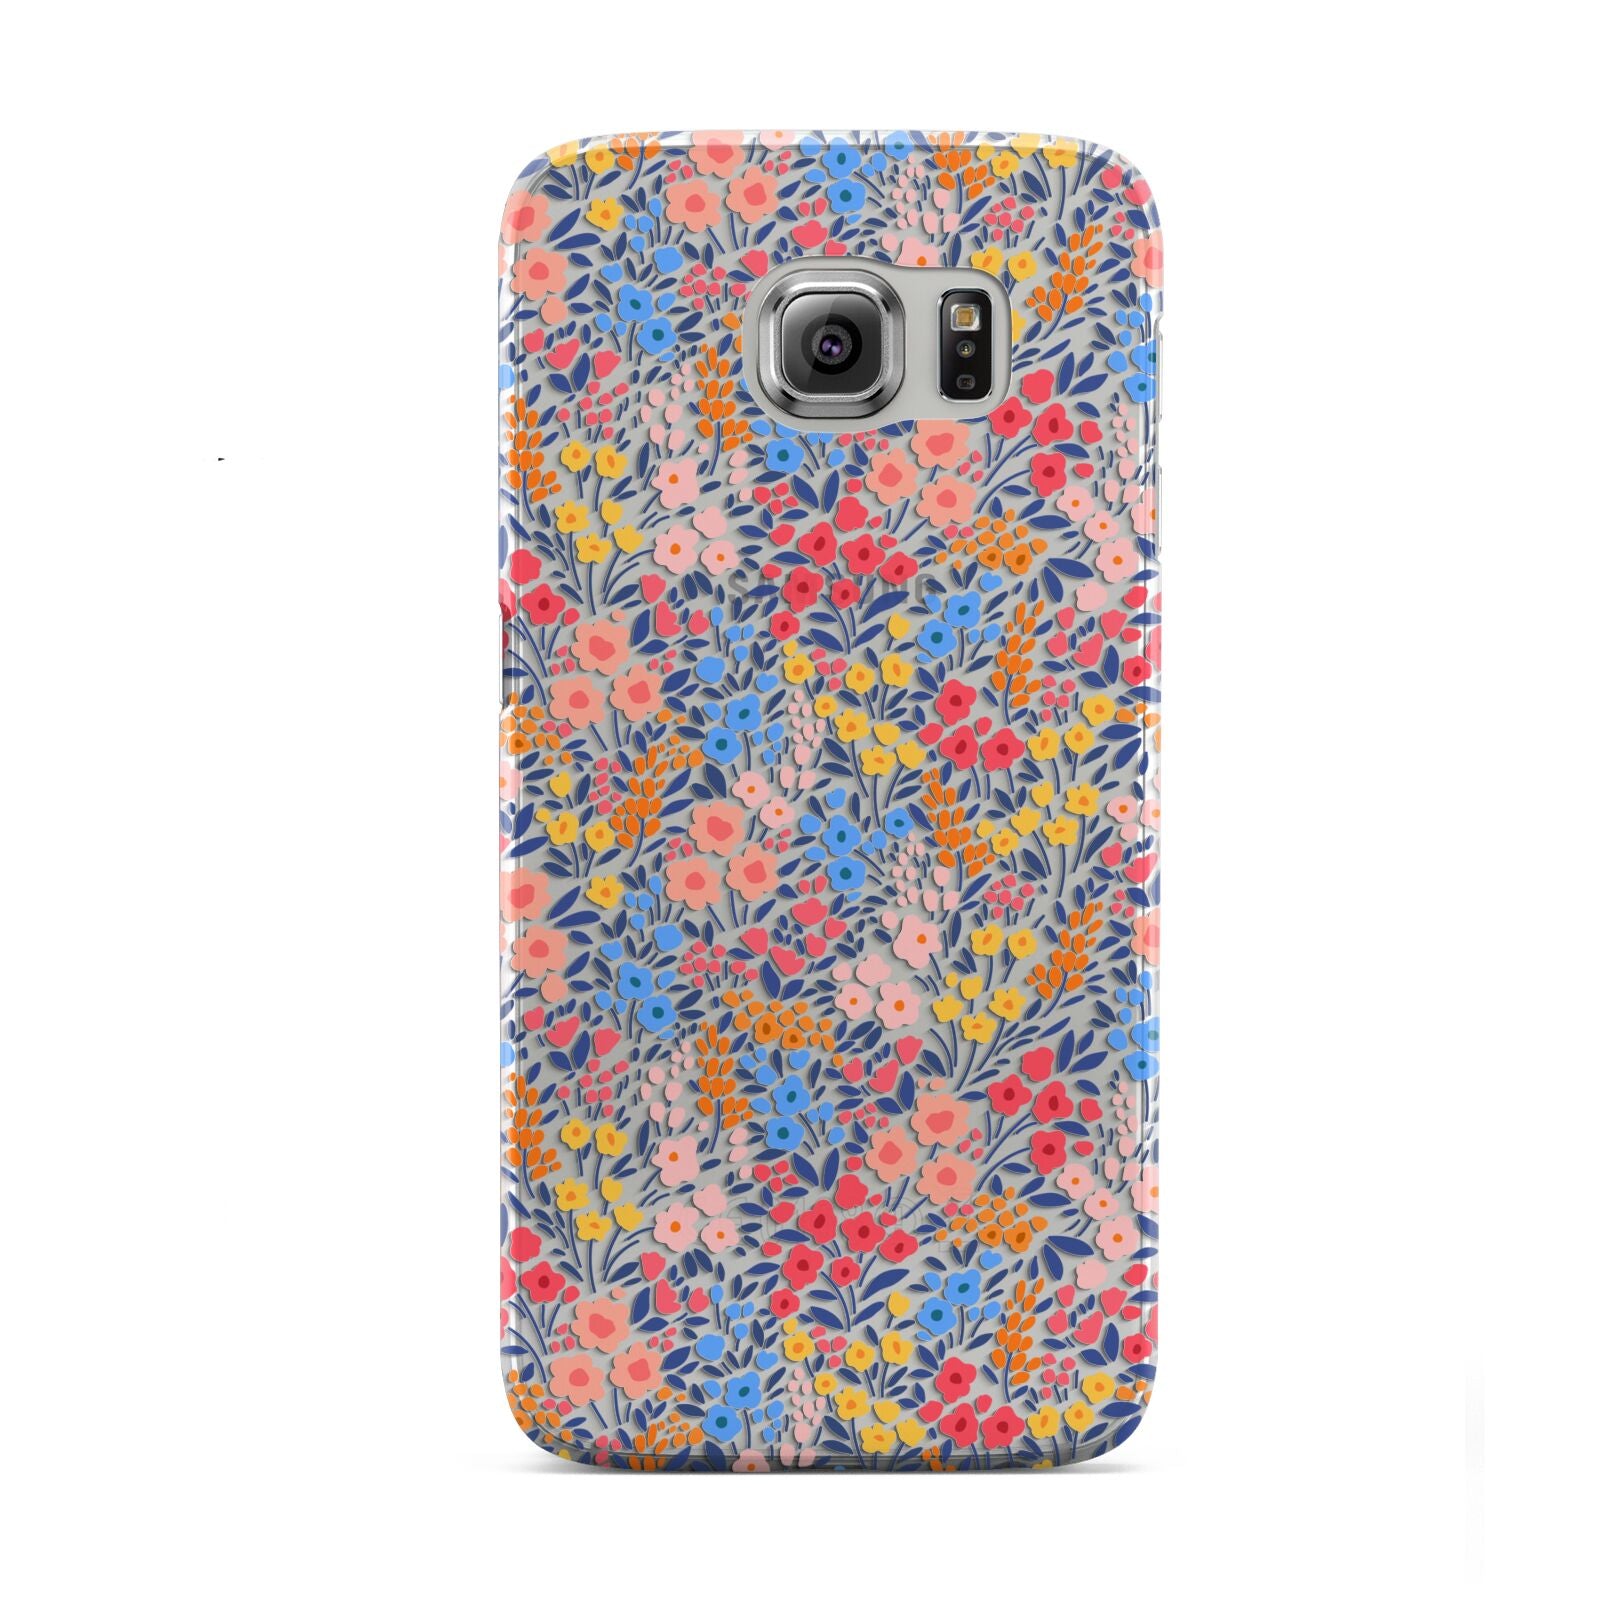 Small Flowers Samsung Galaxy S6 Case